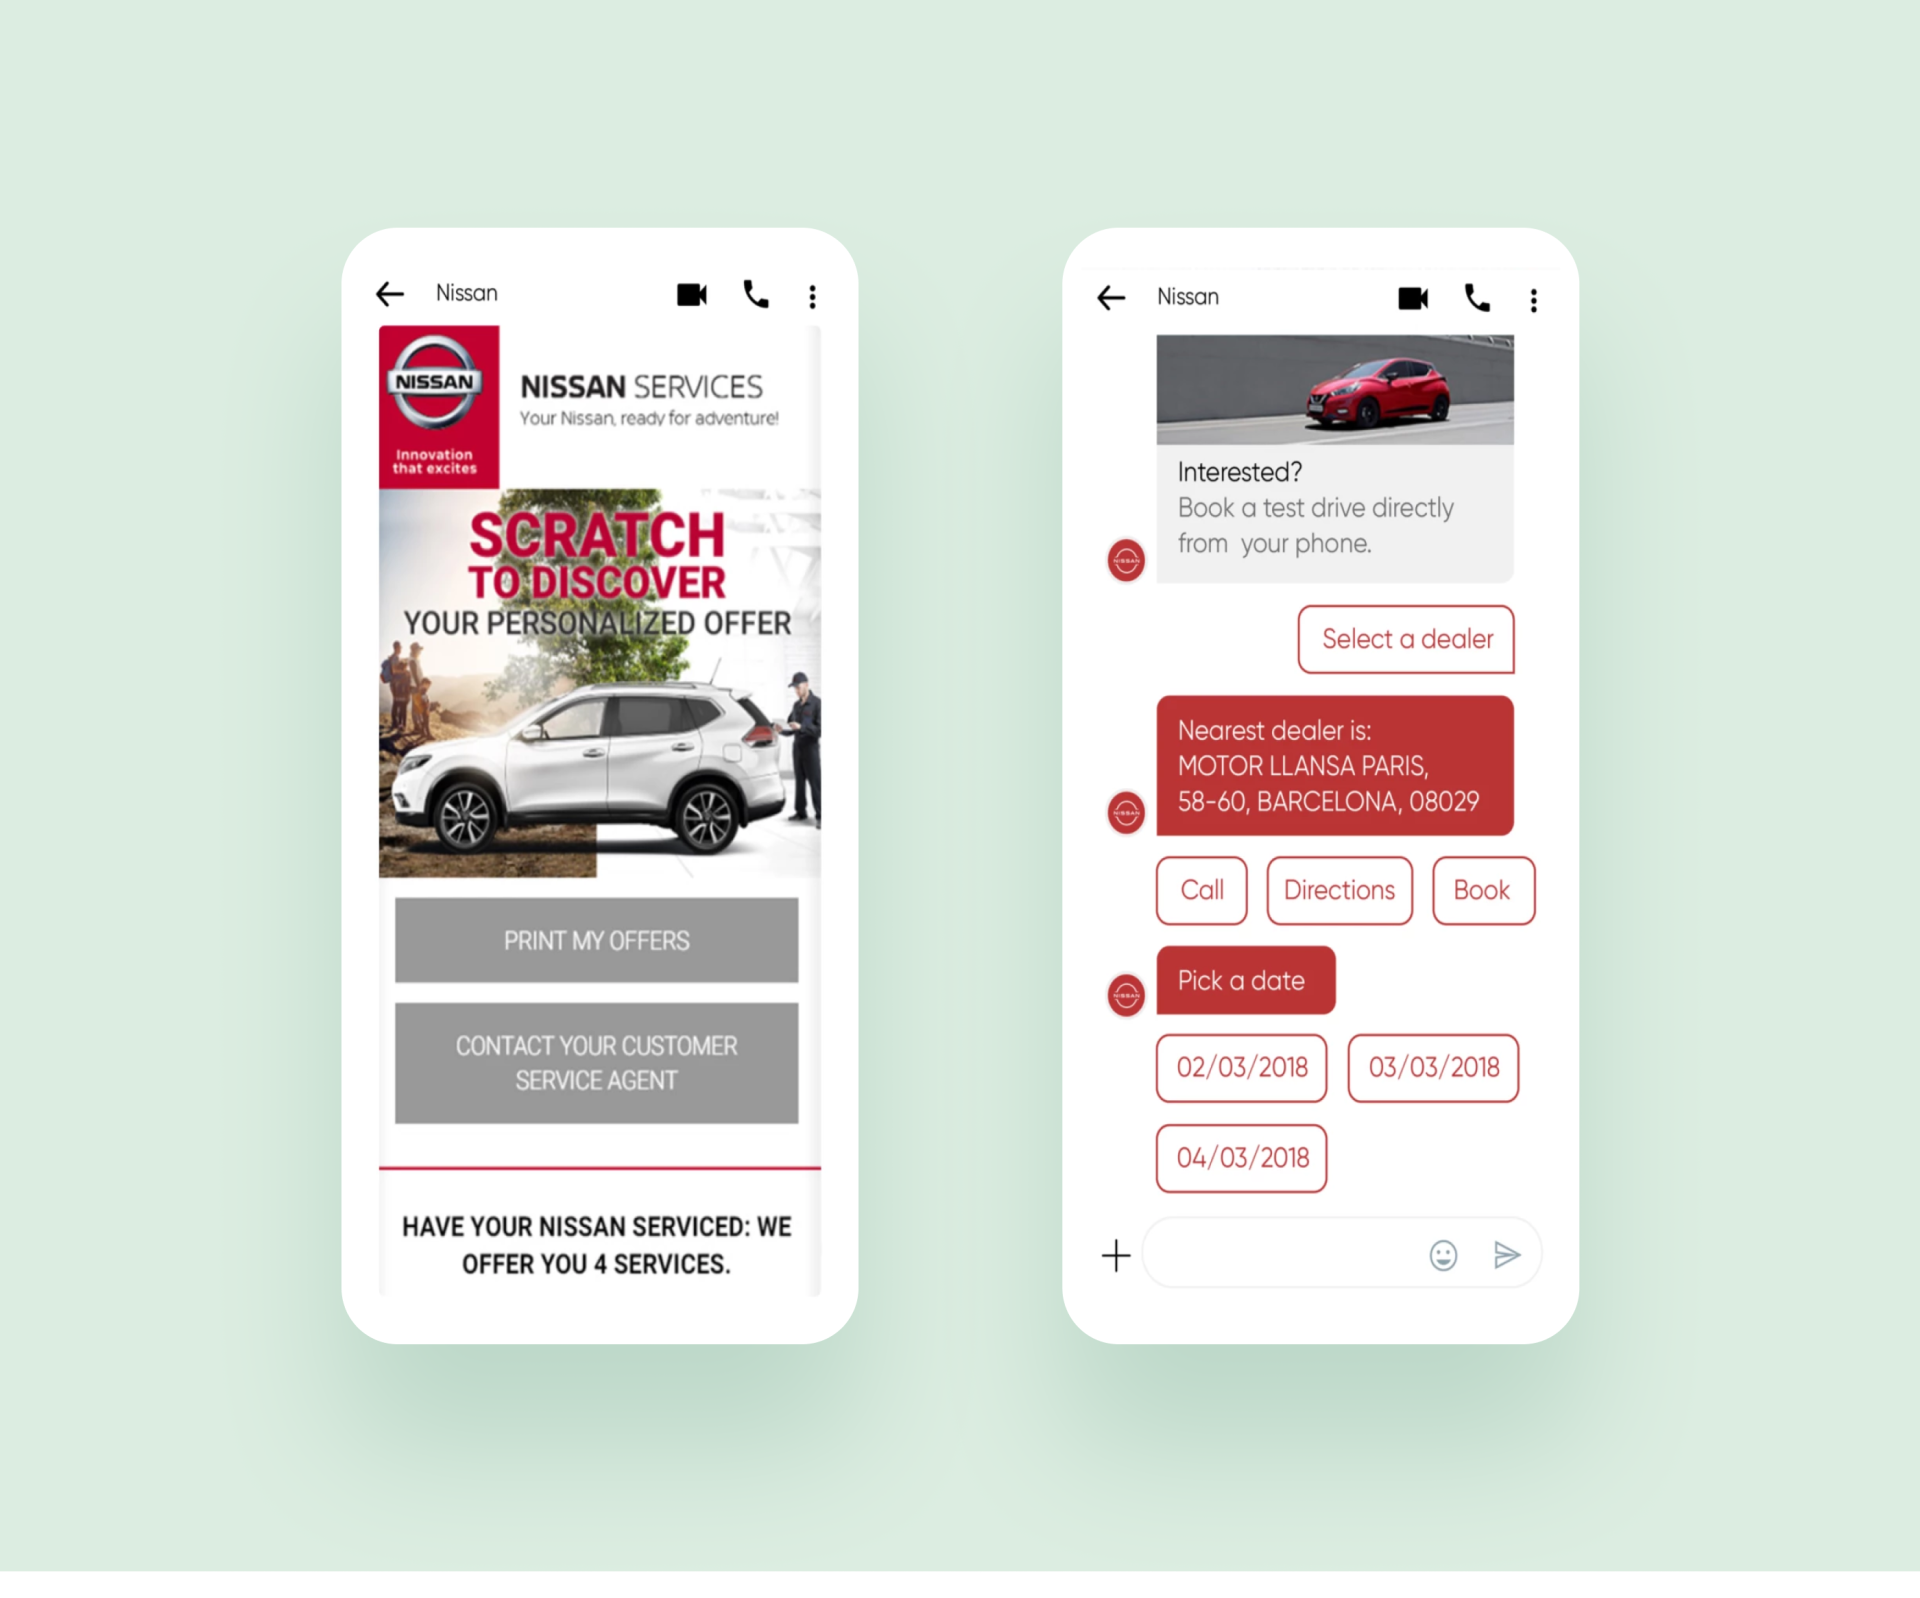 Nissan used RCS messages to incentivize people to come to their stores